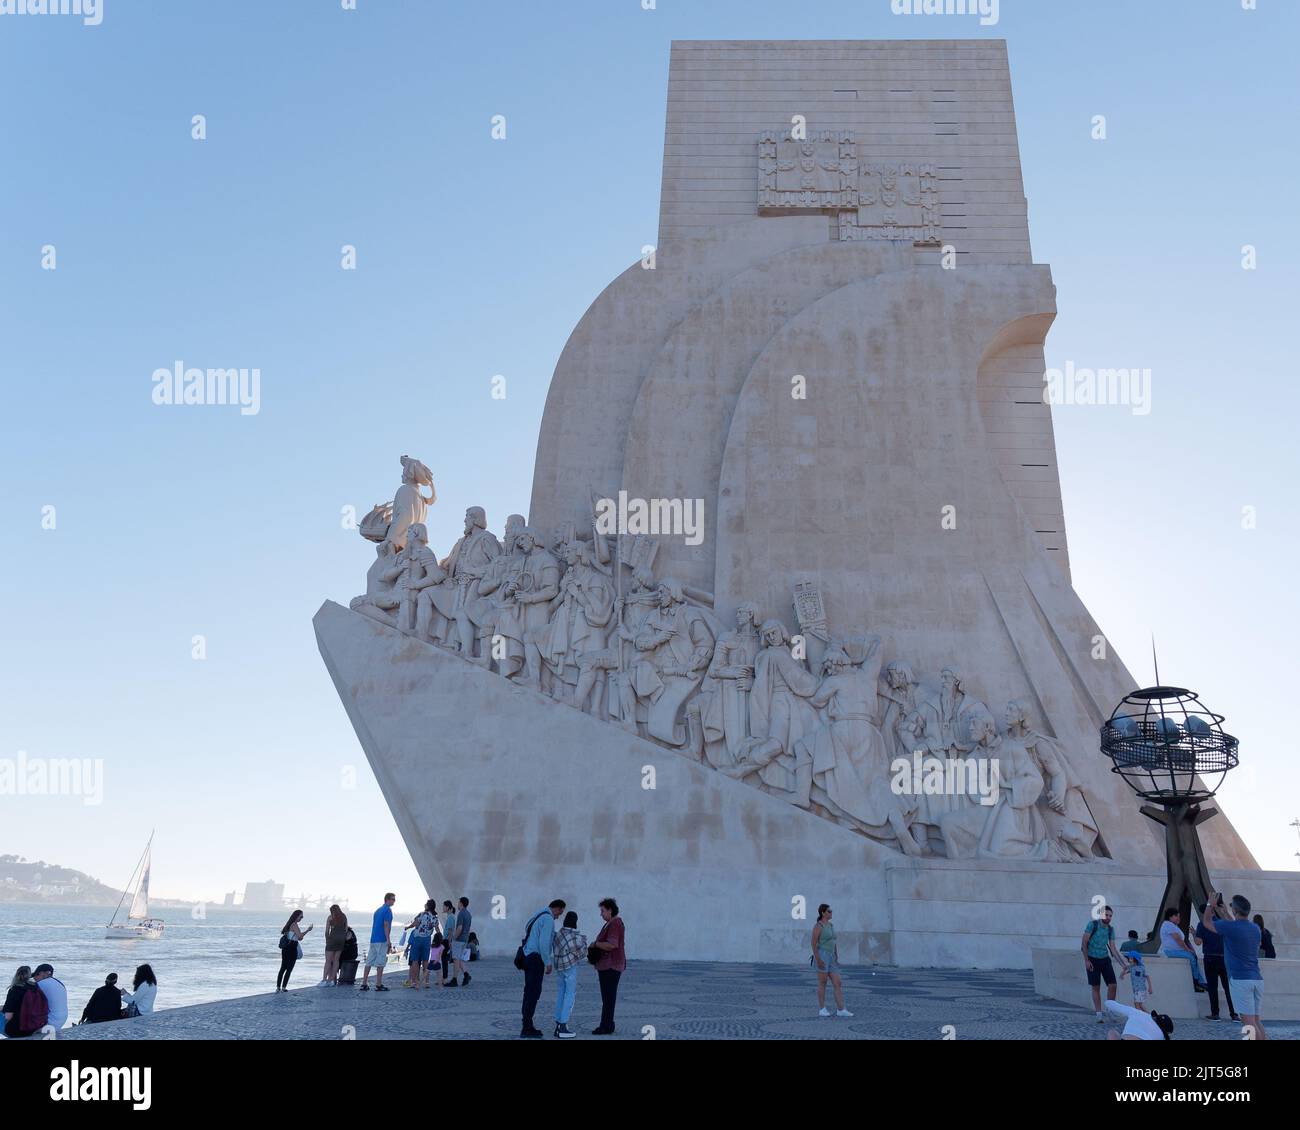 The Padrão dos Descobrimentos (Monument to the Discoveries) in Belem, district of Lisbon, Portugal Stock Photo